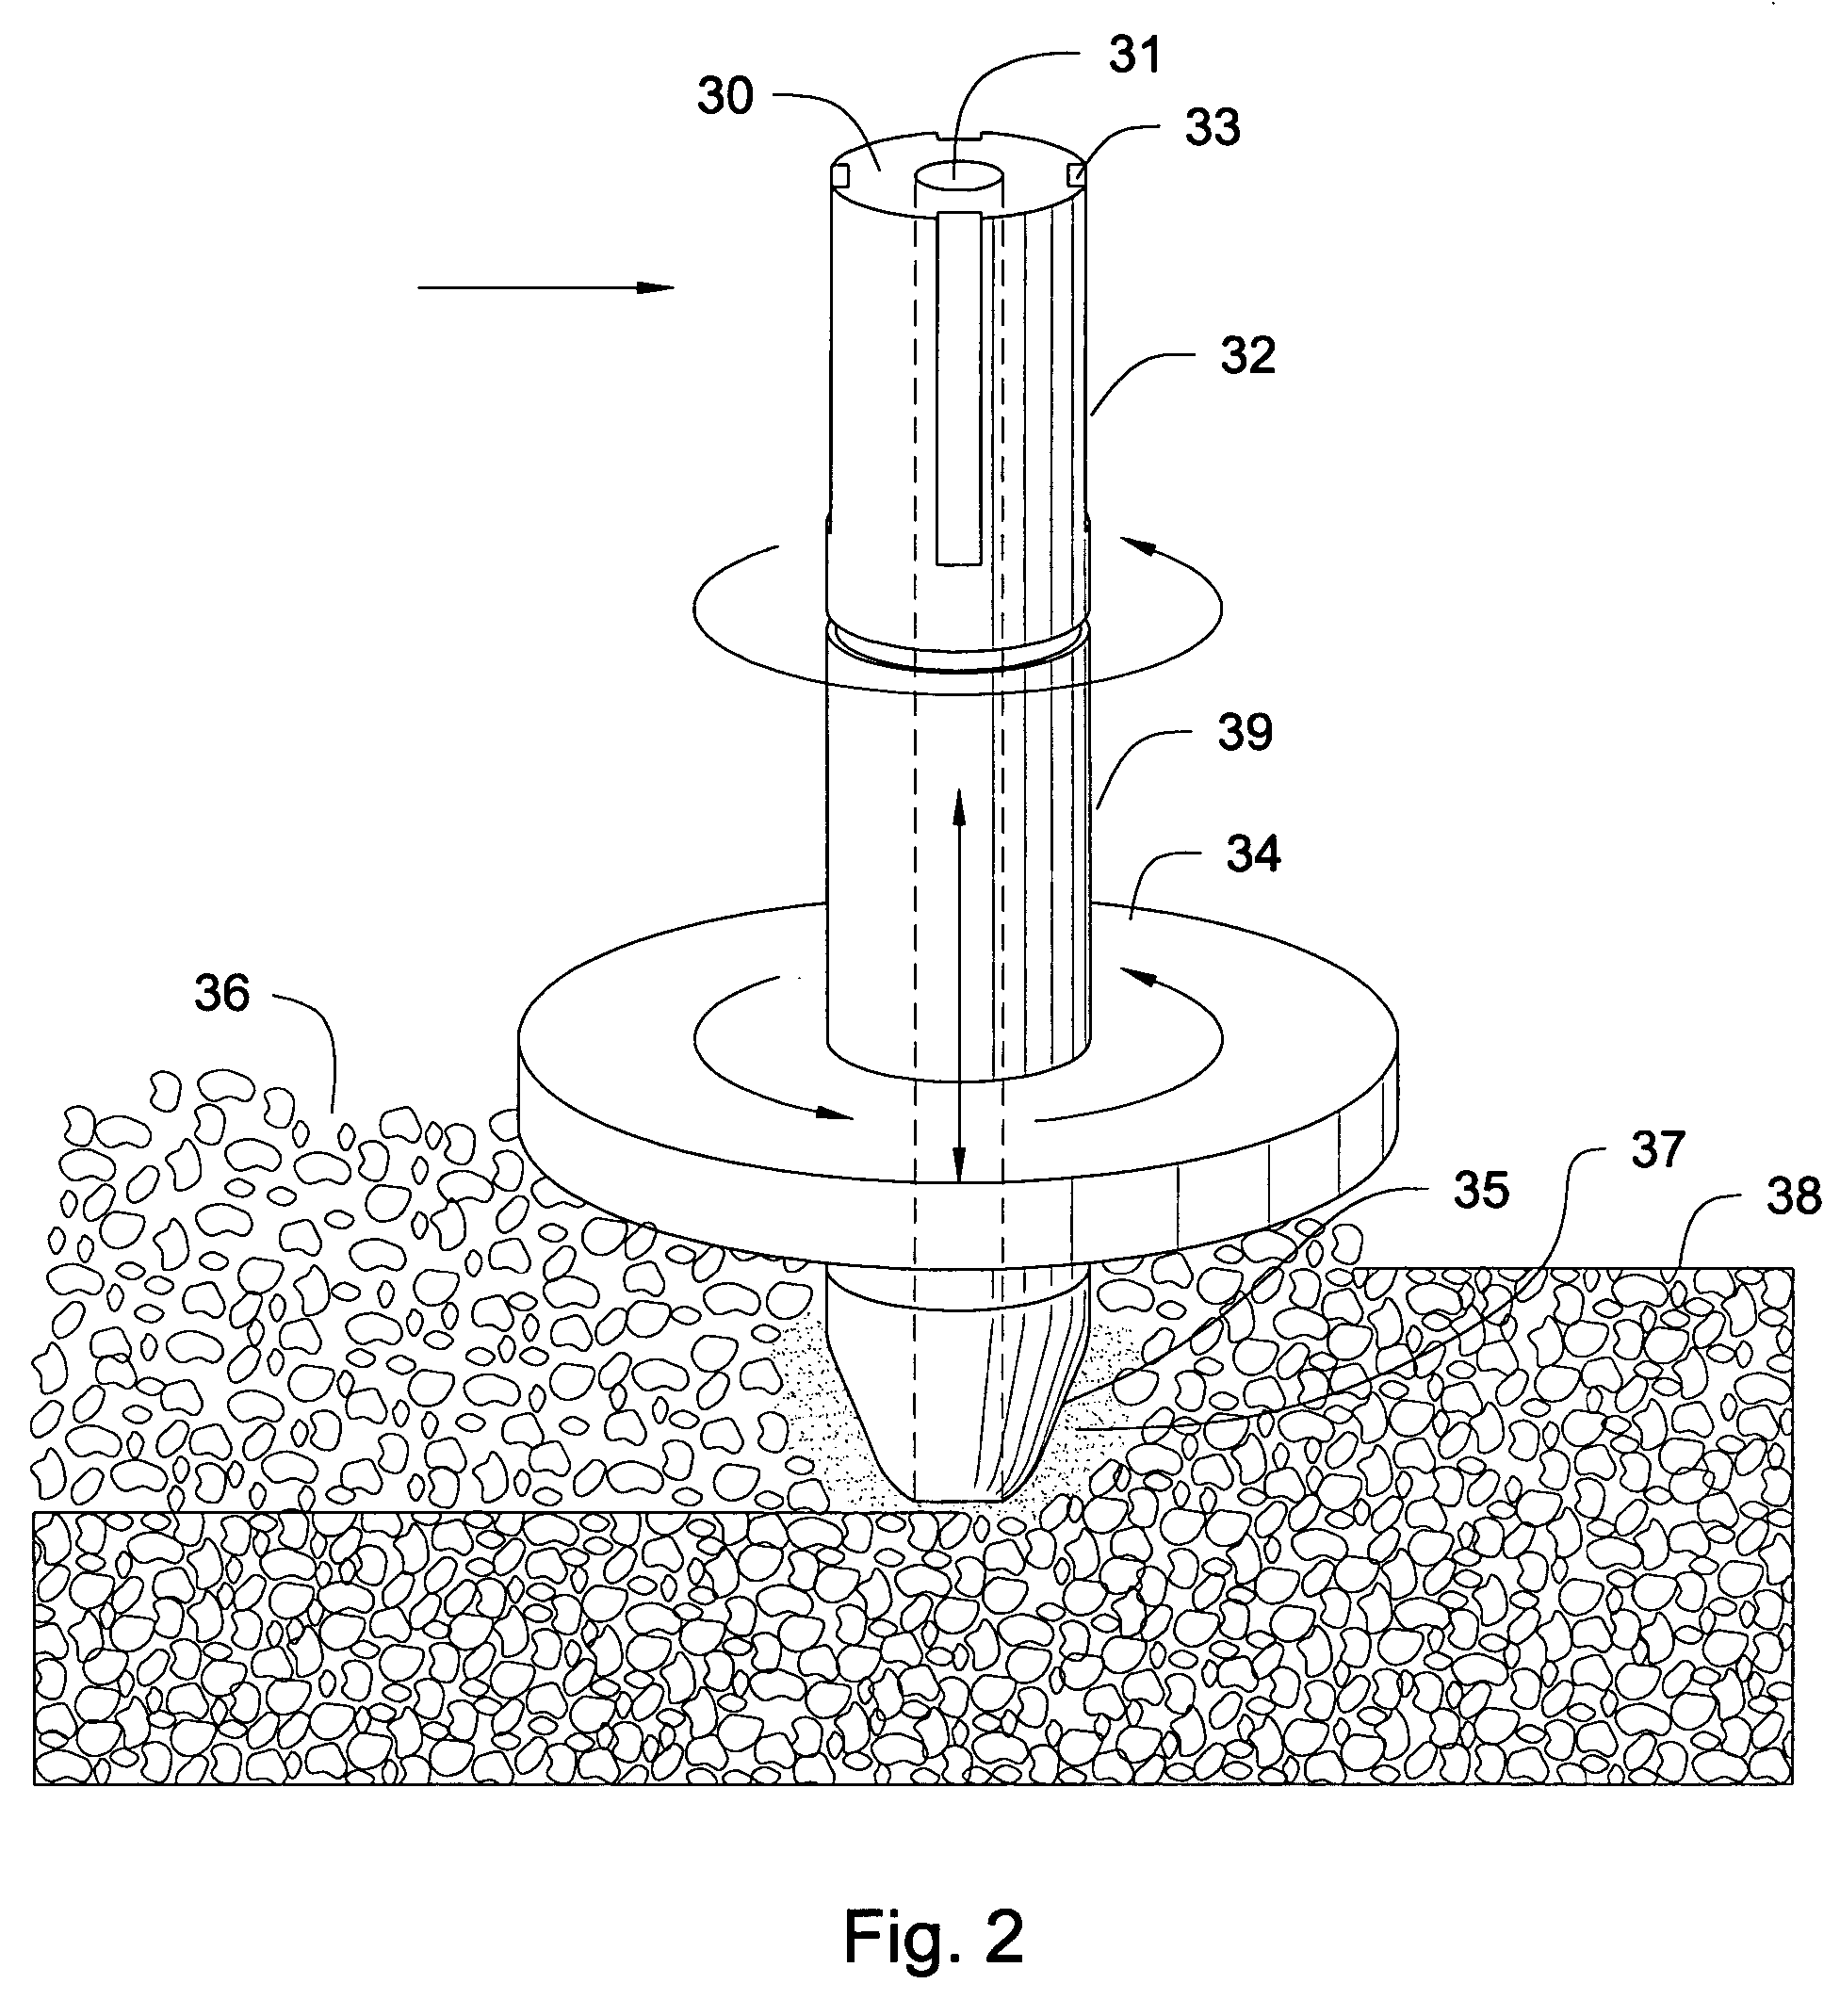 Apparatus and method for working asphalt pavement